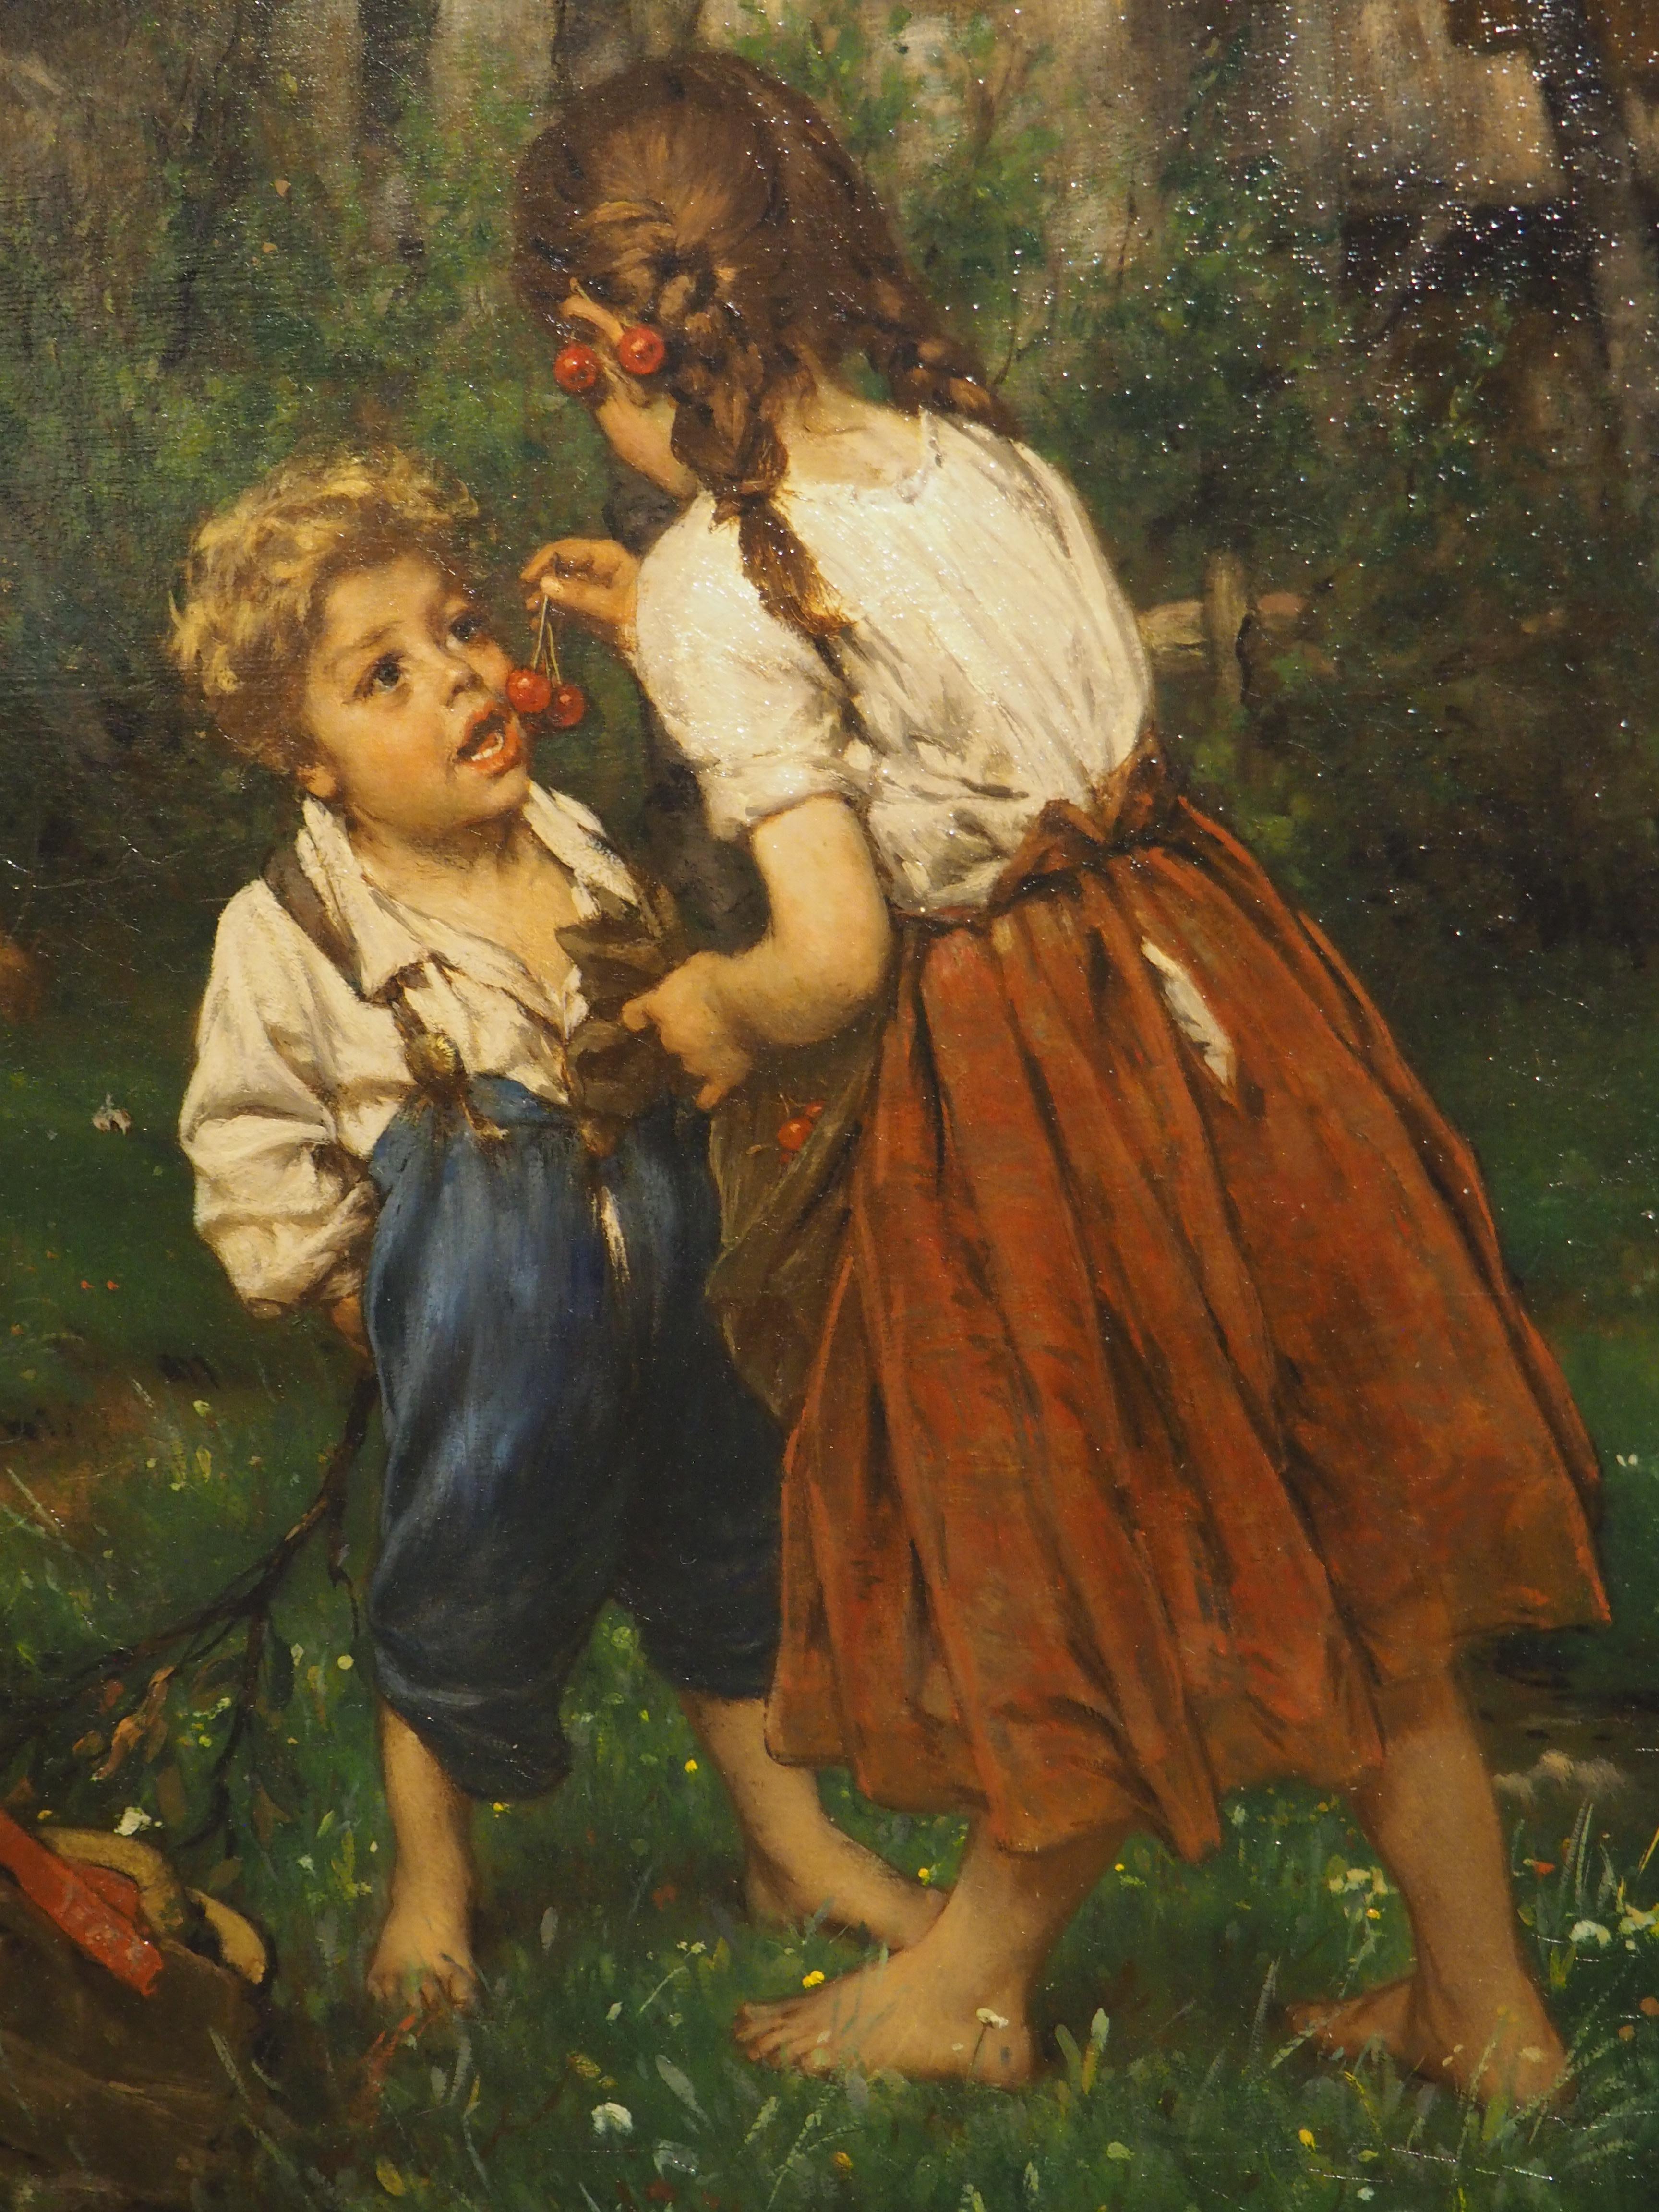 A charming oil on canvas genre painting depicting the innocence of youth, the subjects of this scene are two young children on a cherry farm. A young girl with light brown hair in pigtail braids, clad in a white blouse and garnet skirt, stands with